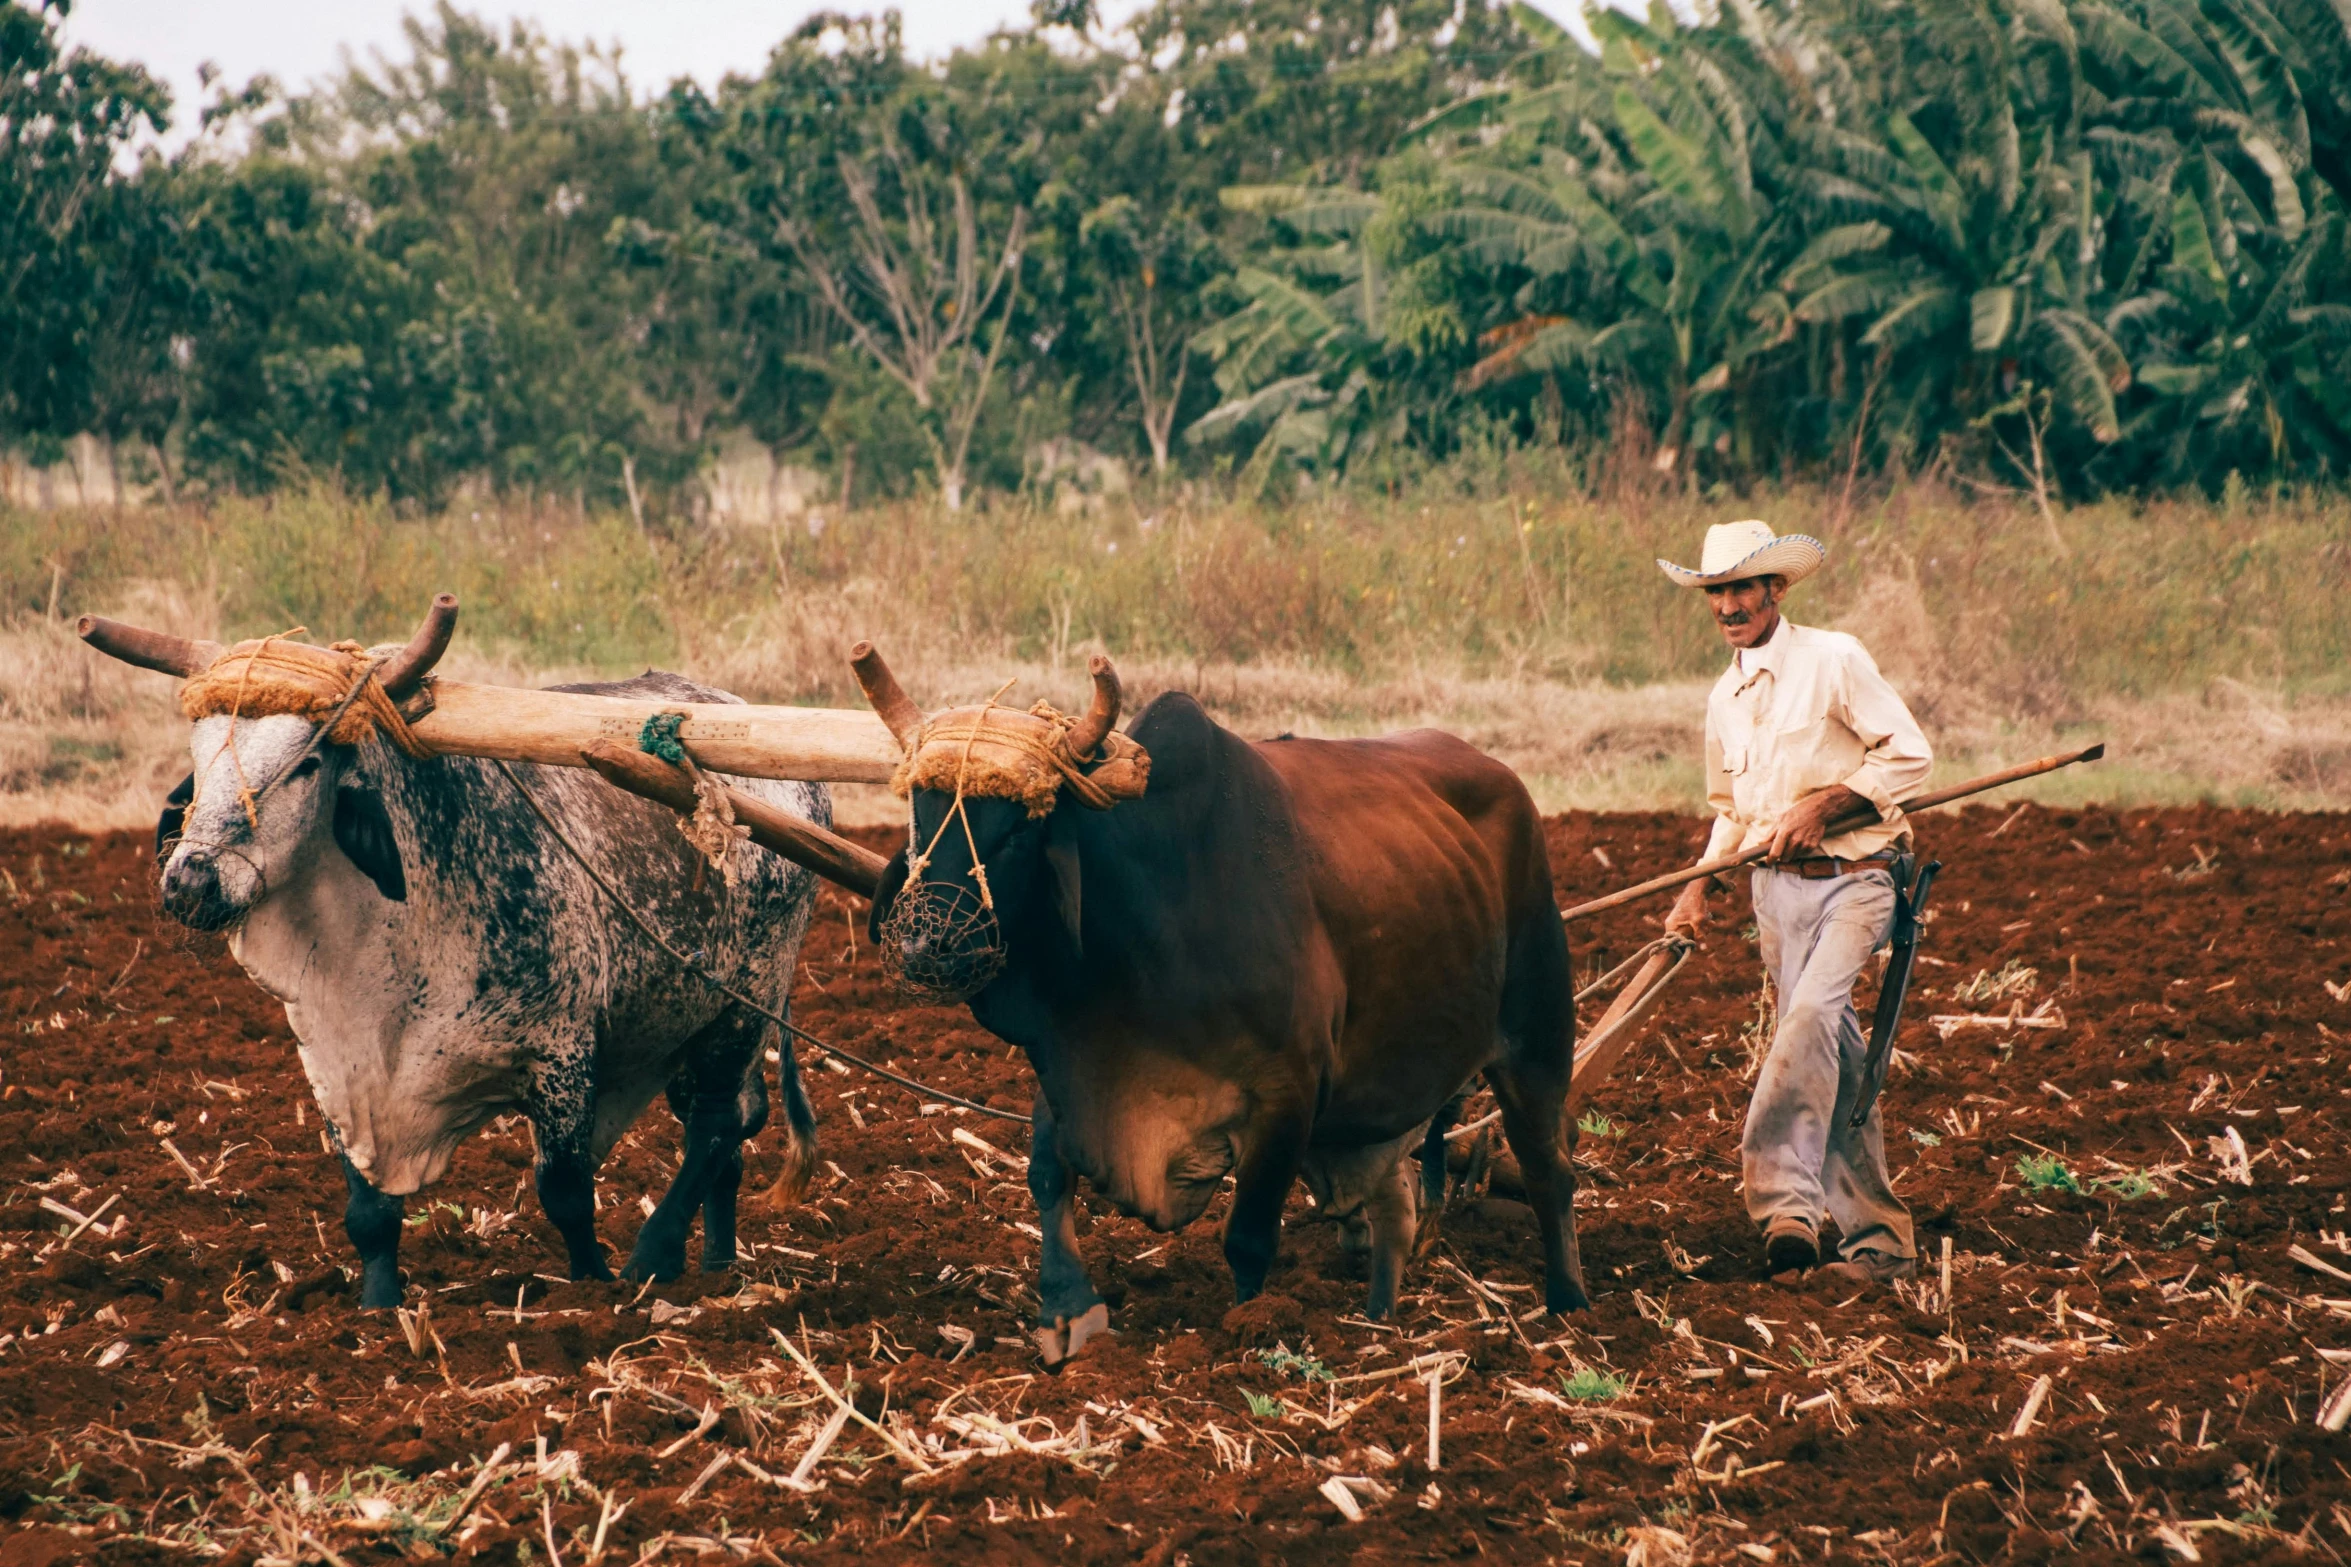 a man plowing a field with two oxen, by Willard Mullin, trending on unsplash, cuba, avatar image, 1980s photo